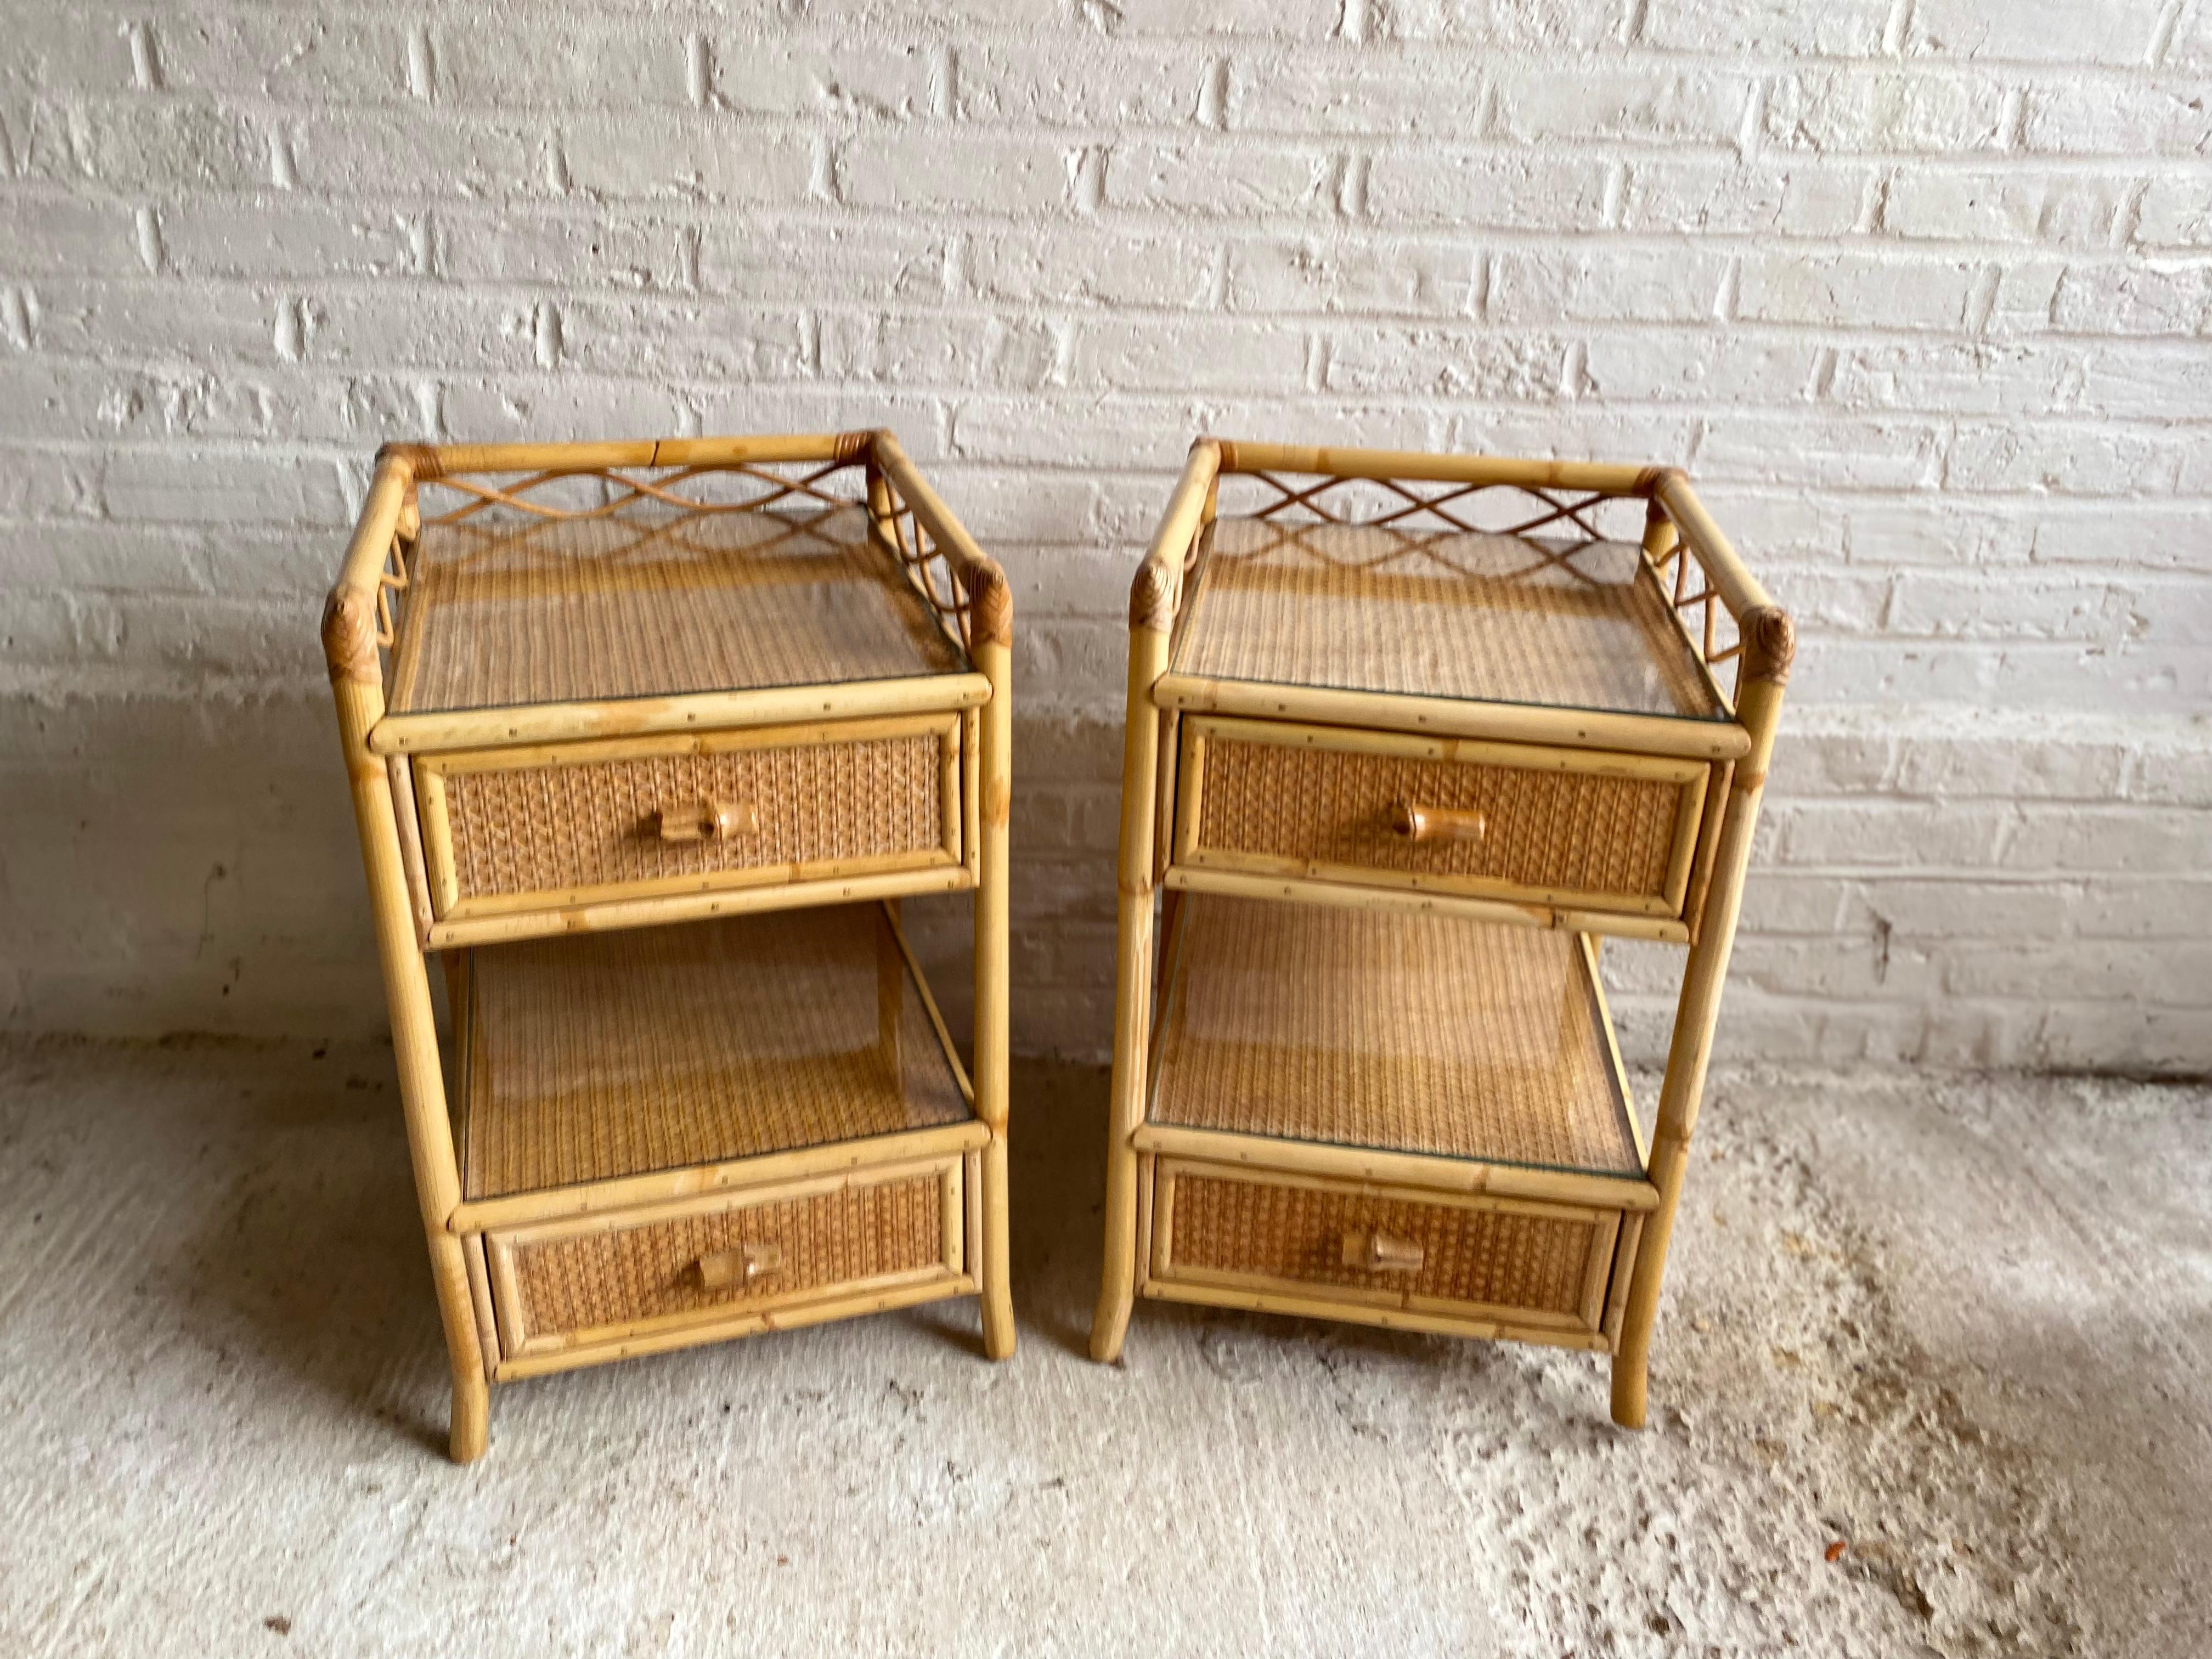 Pair of mid-century rattan / cane nightstands / bedside tables by English company, Angraves, England, 1970s.

Each nightstand has 2 x drawers with cane handles, with a void in between the two, they are covered in cane weave matting, and each have